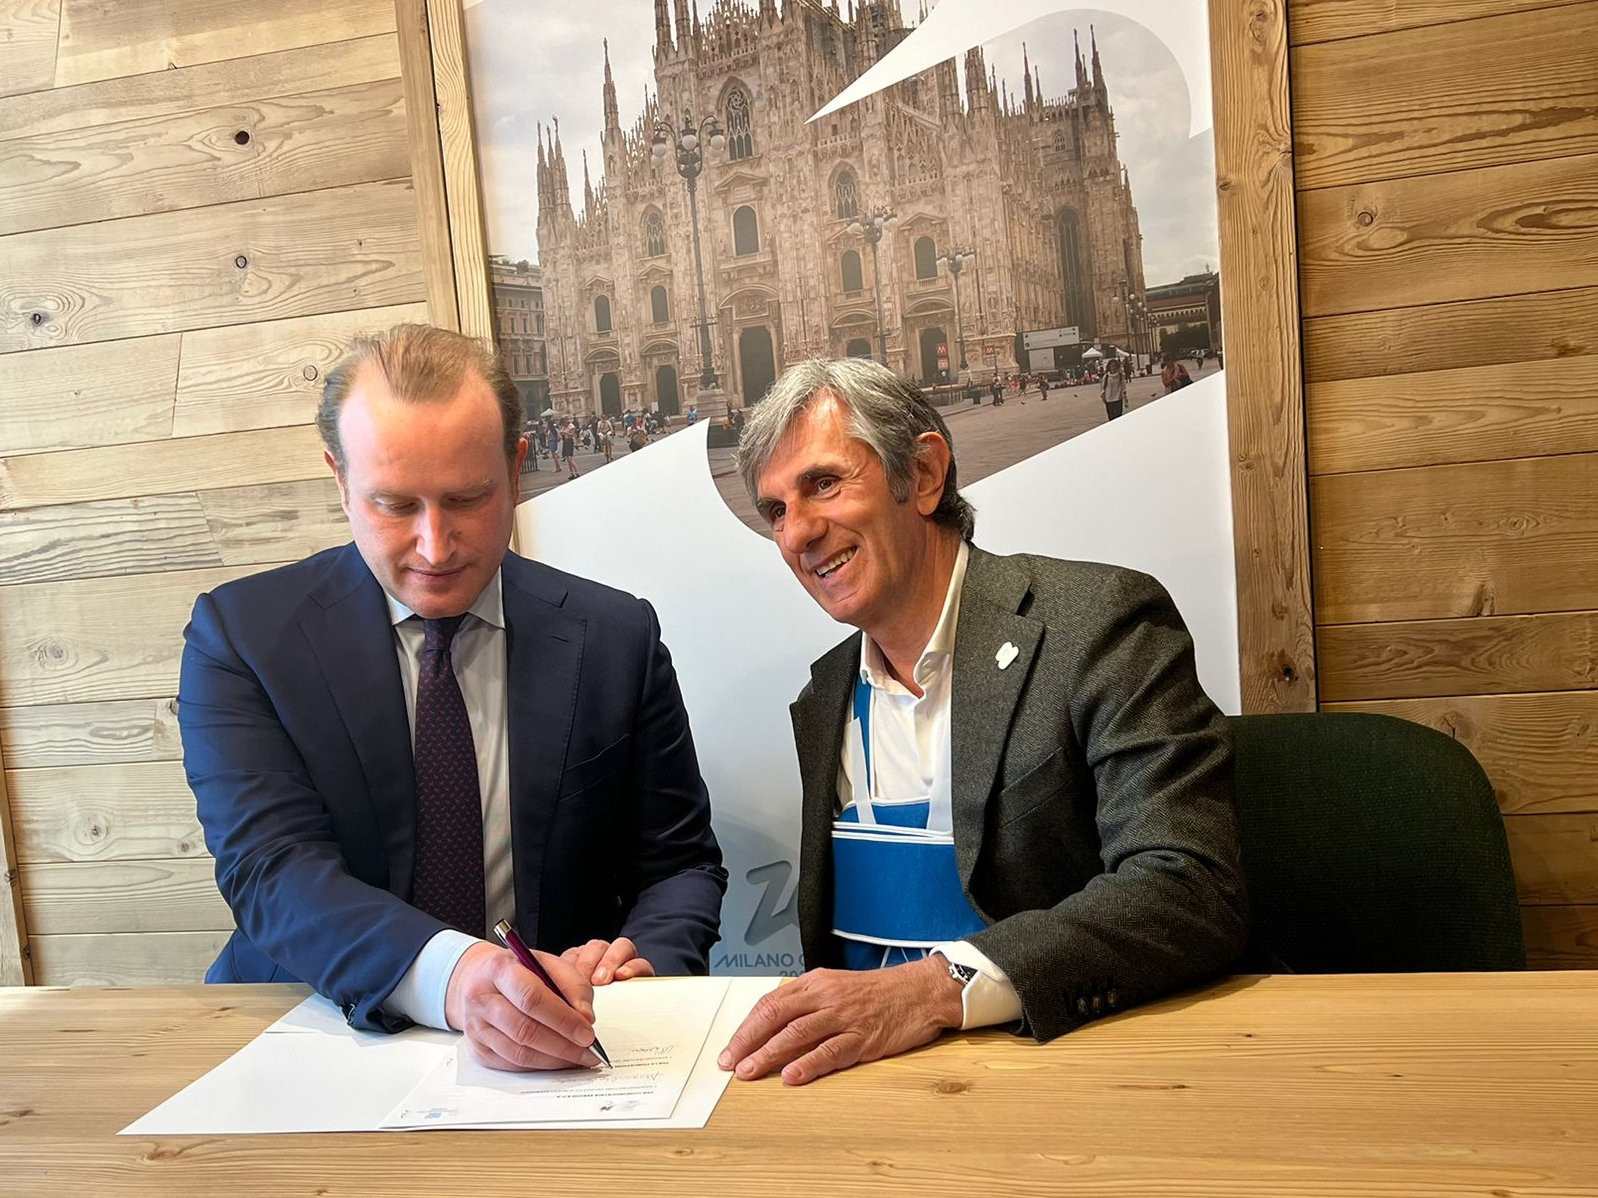 Milan Cortina 2026 and Confindustria are to promote opportunities related to the marketing programme of the next Winter Olympics and Paralympics ©Twitter/Confindustria